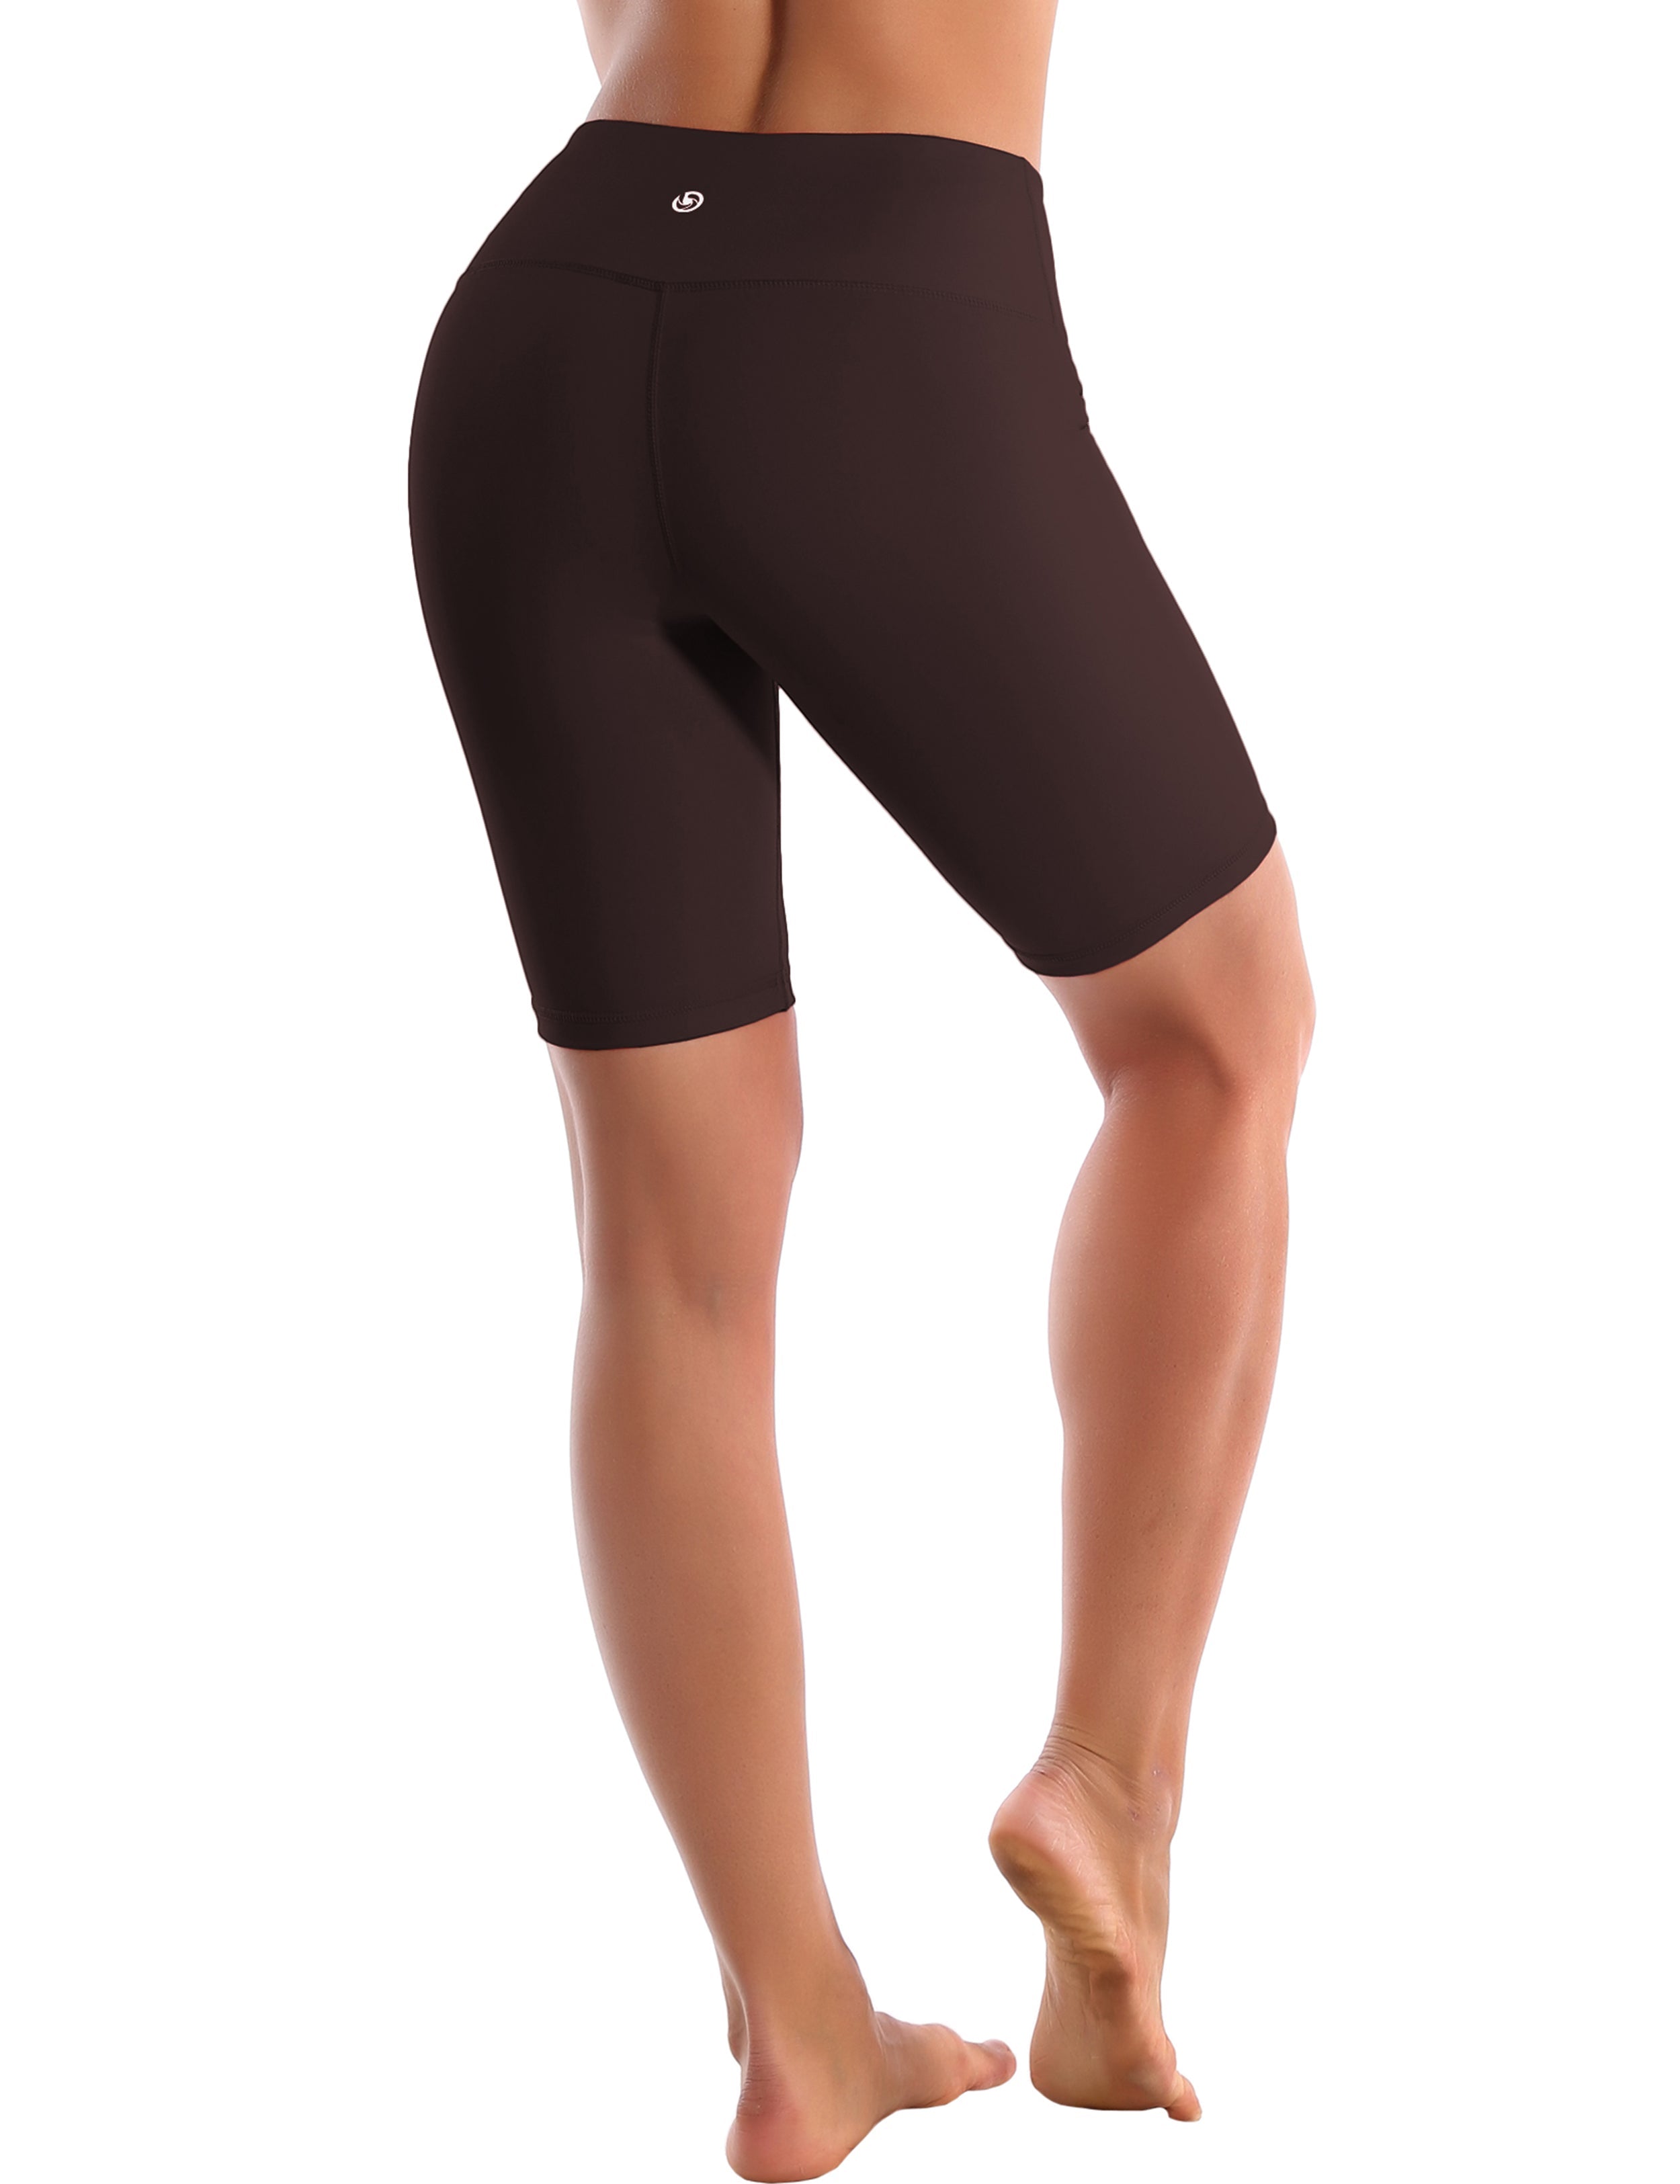 8" High Waist Running Shorts mahoganymaroon Sleek, soft, smooth and totally comfortable: our newest style is here. Softest-ever fabric High elasticity High density 4-way stretch Fabric doesn't attract lint easily No see-through Moisture-wicking Machine wash 75% Nylon, 25% Spandex